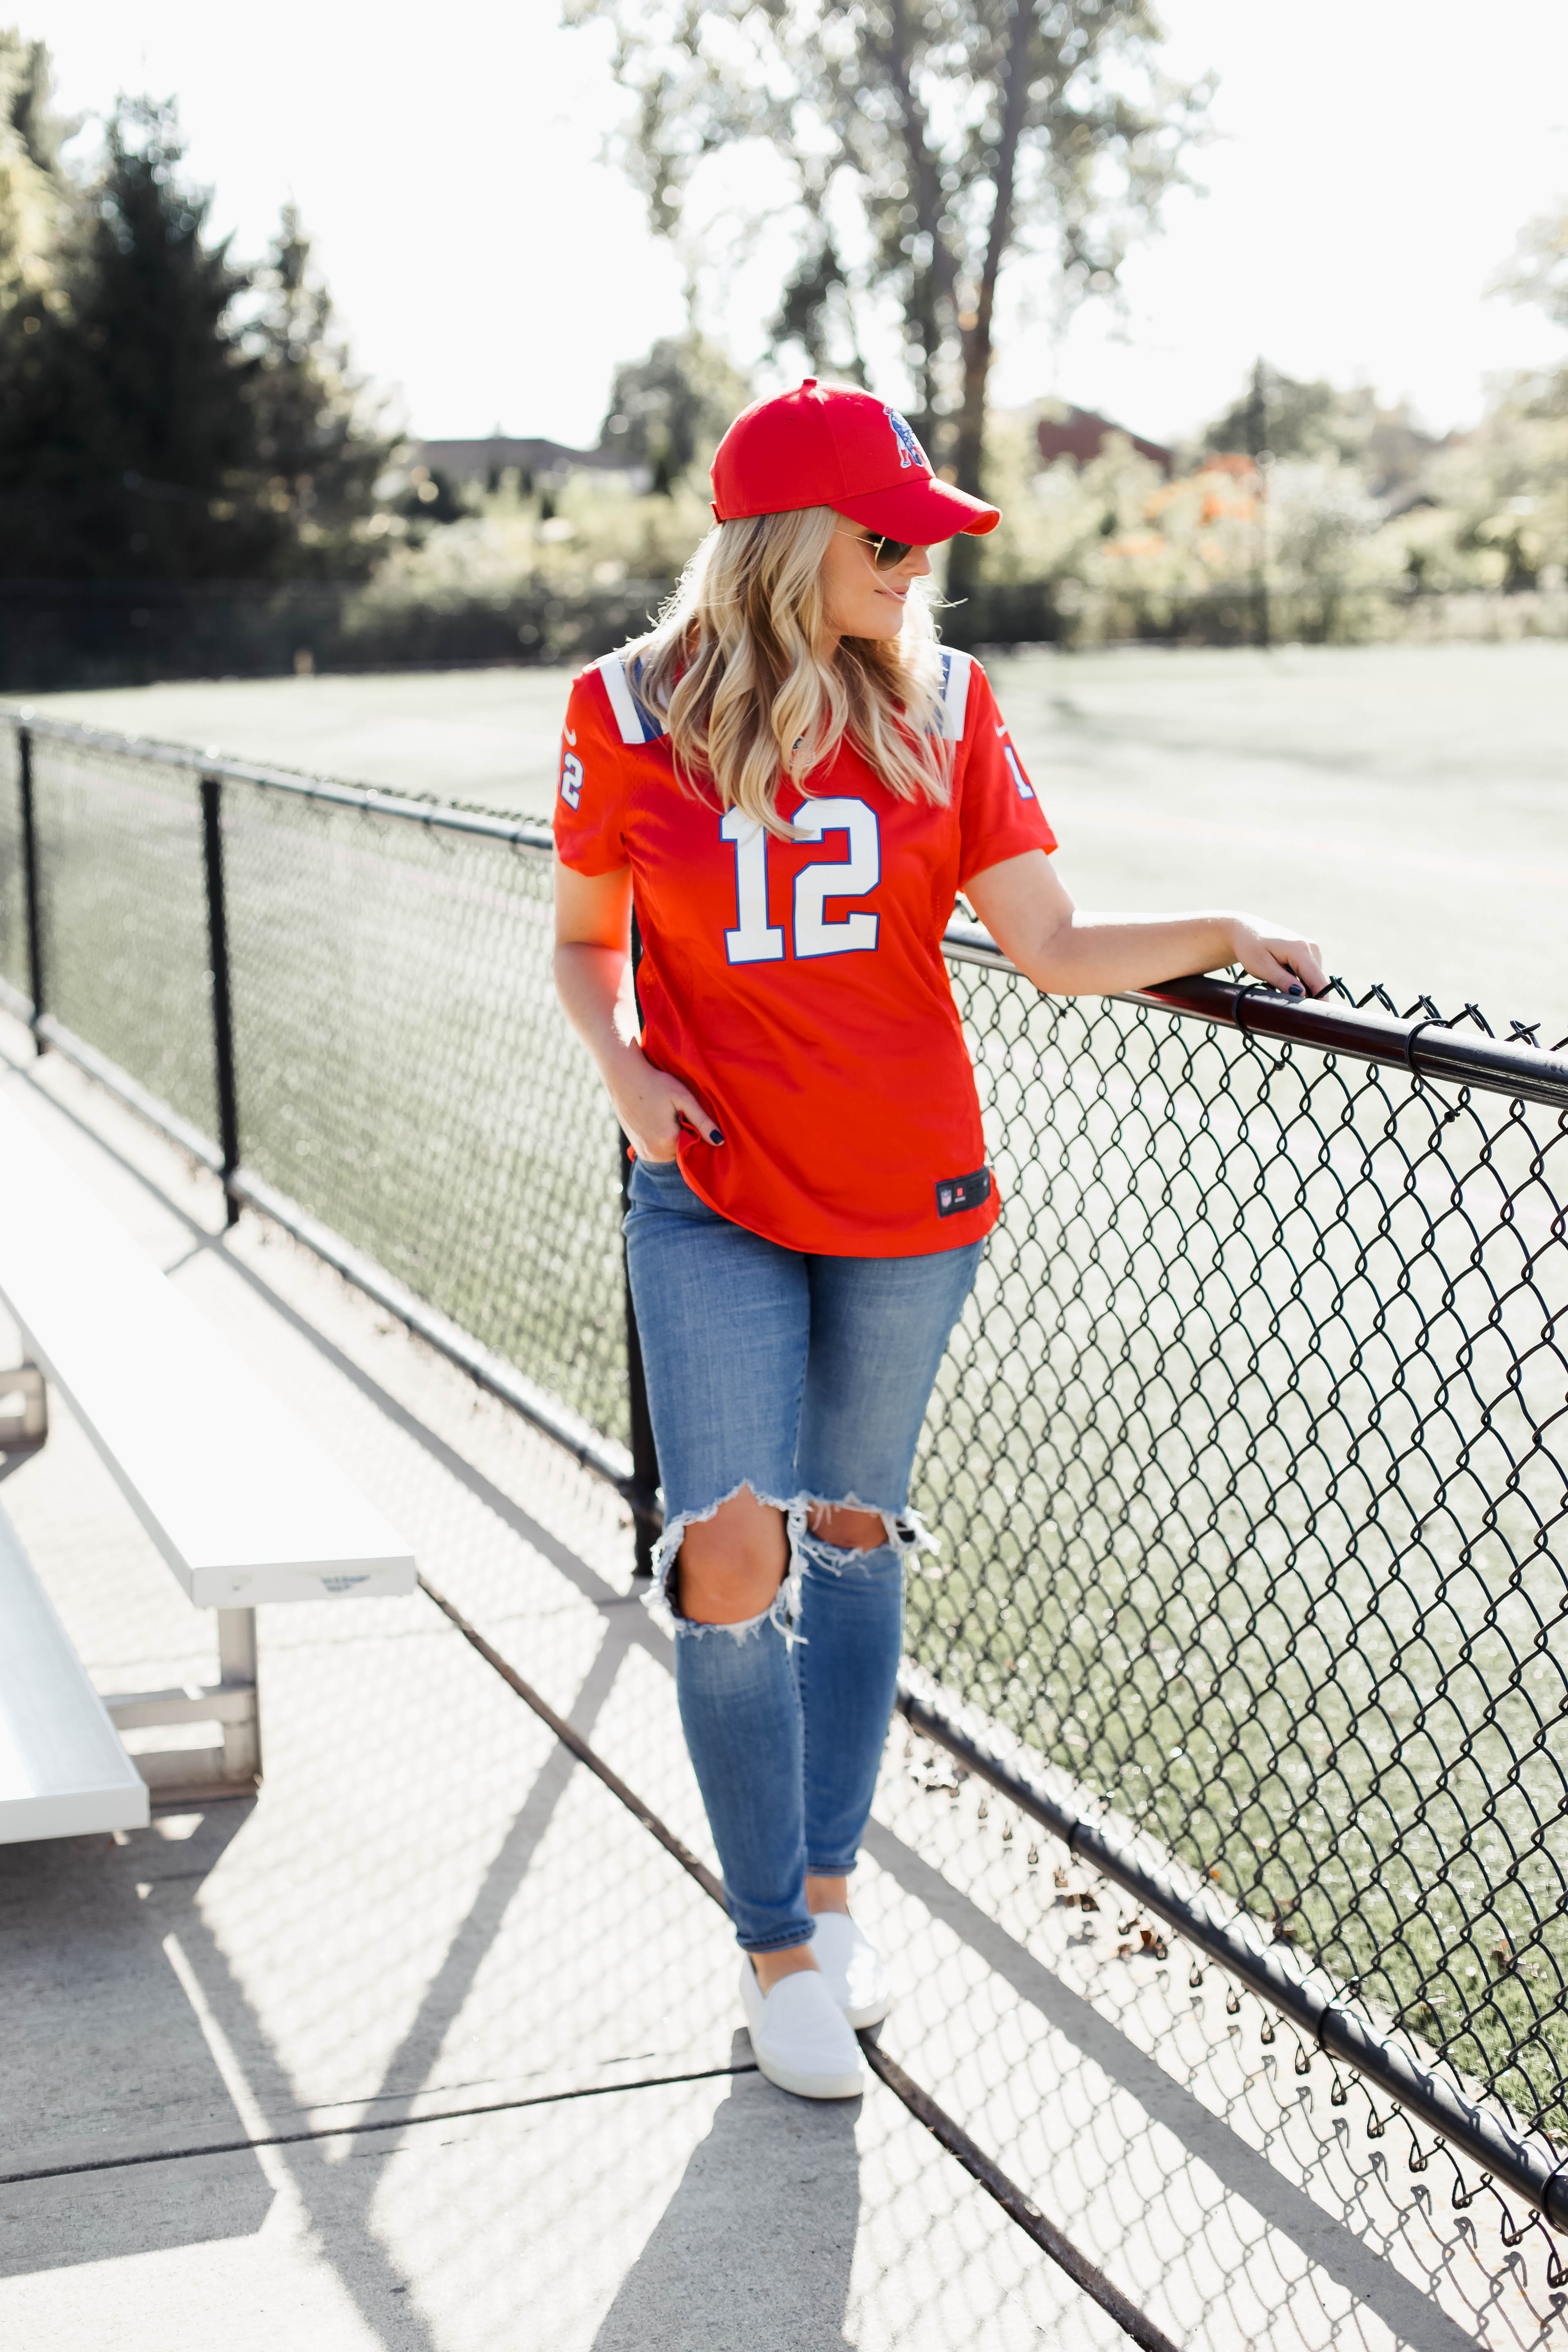 How to Style a Jersey in 10 Ways